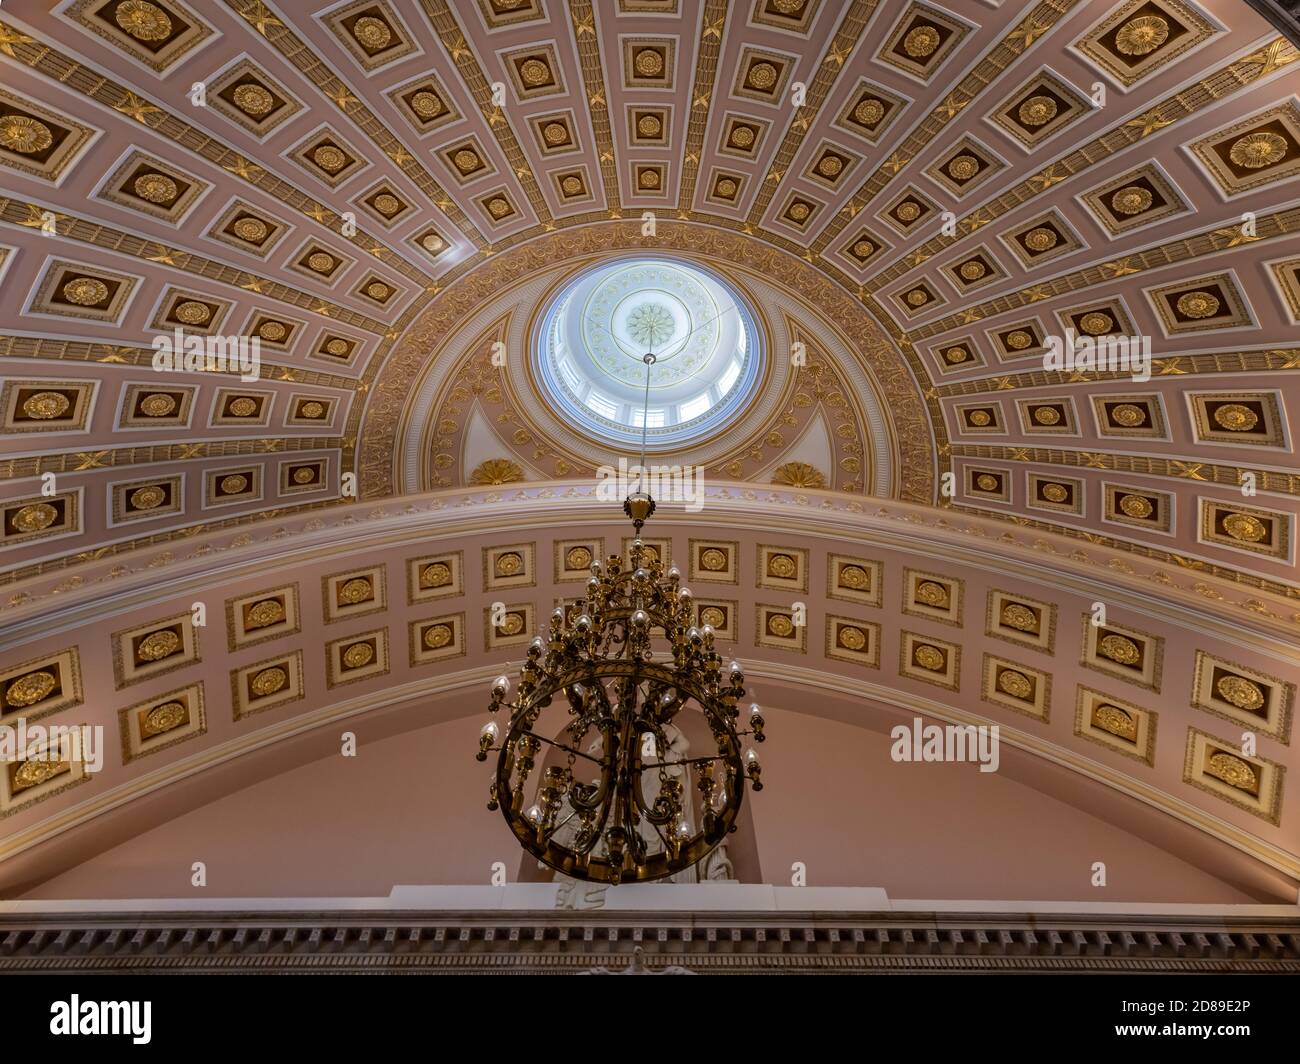 The lantern and highly ornate ceiling of the the National Statuary Hall in the US Capitol Building Stock Photo